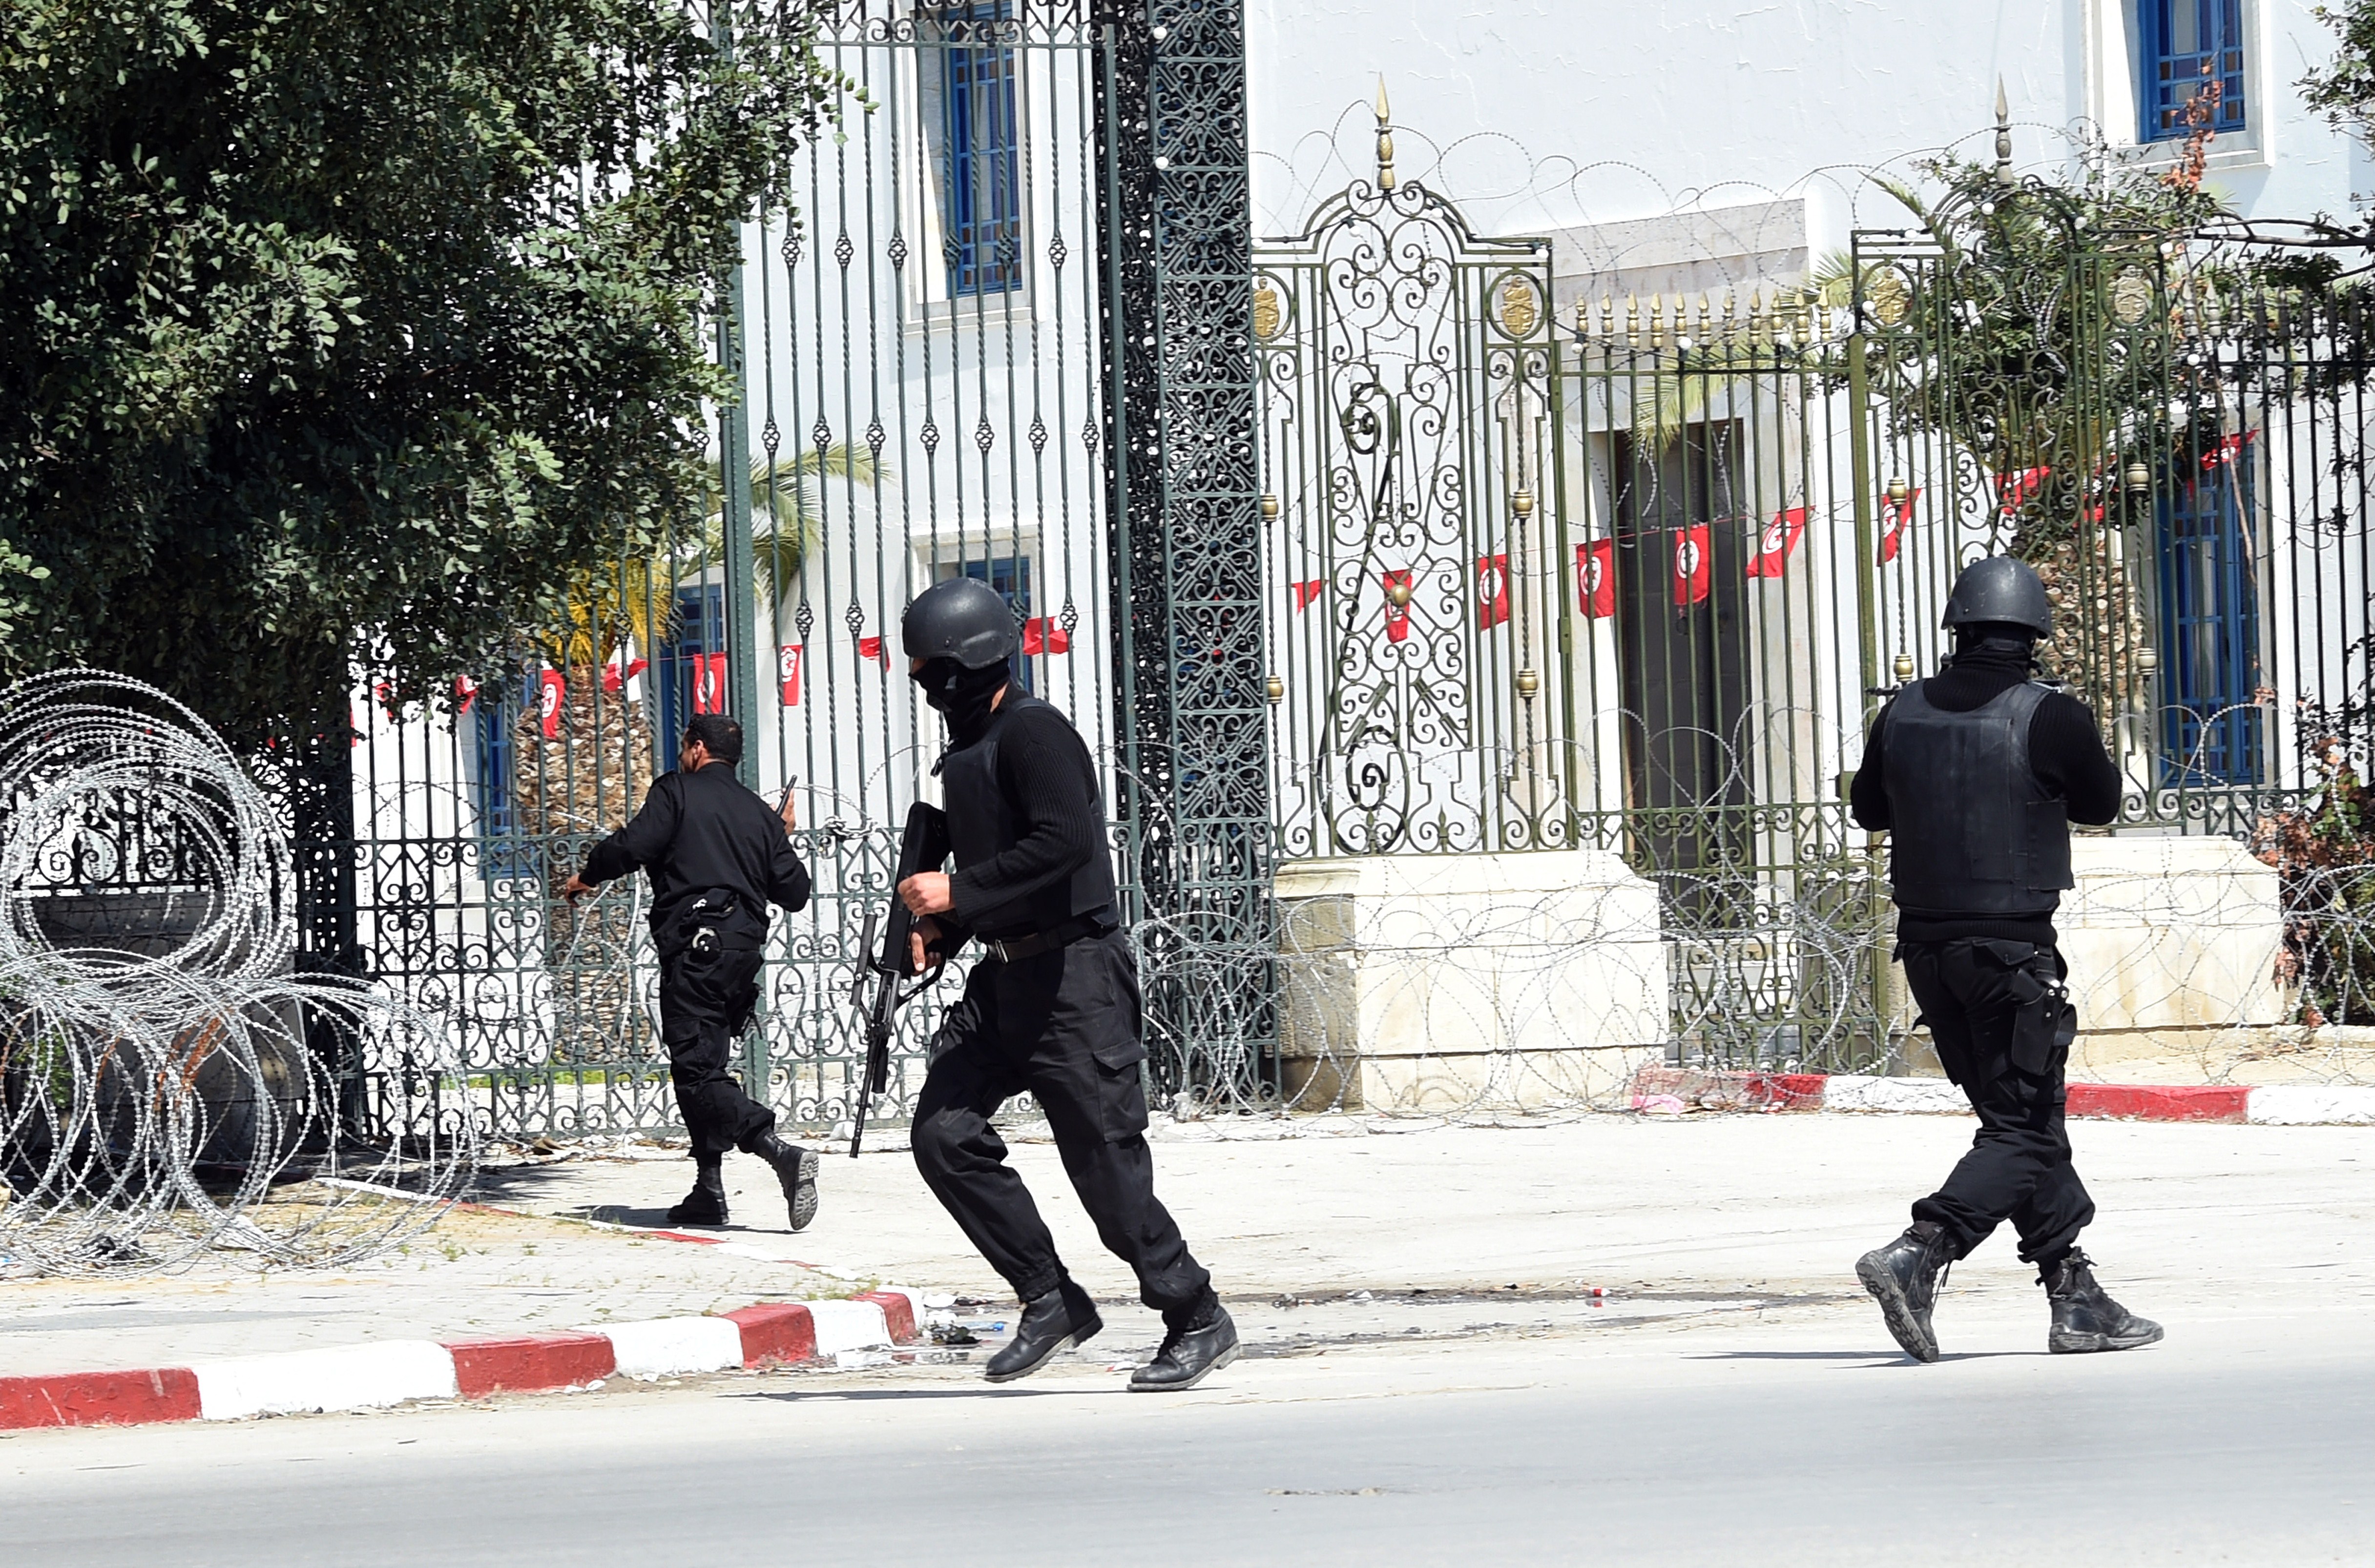 Security forces outside the Bardo Museum. (Getty)